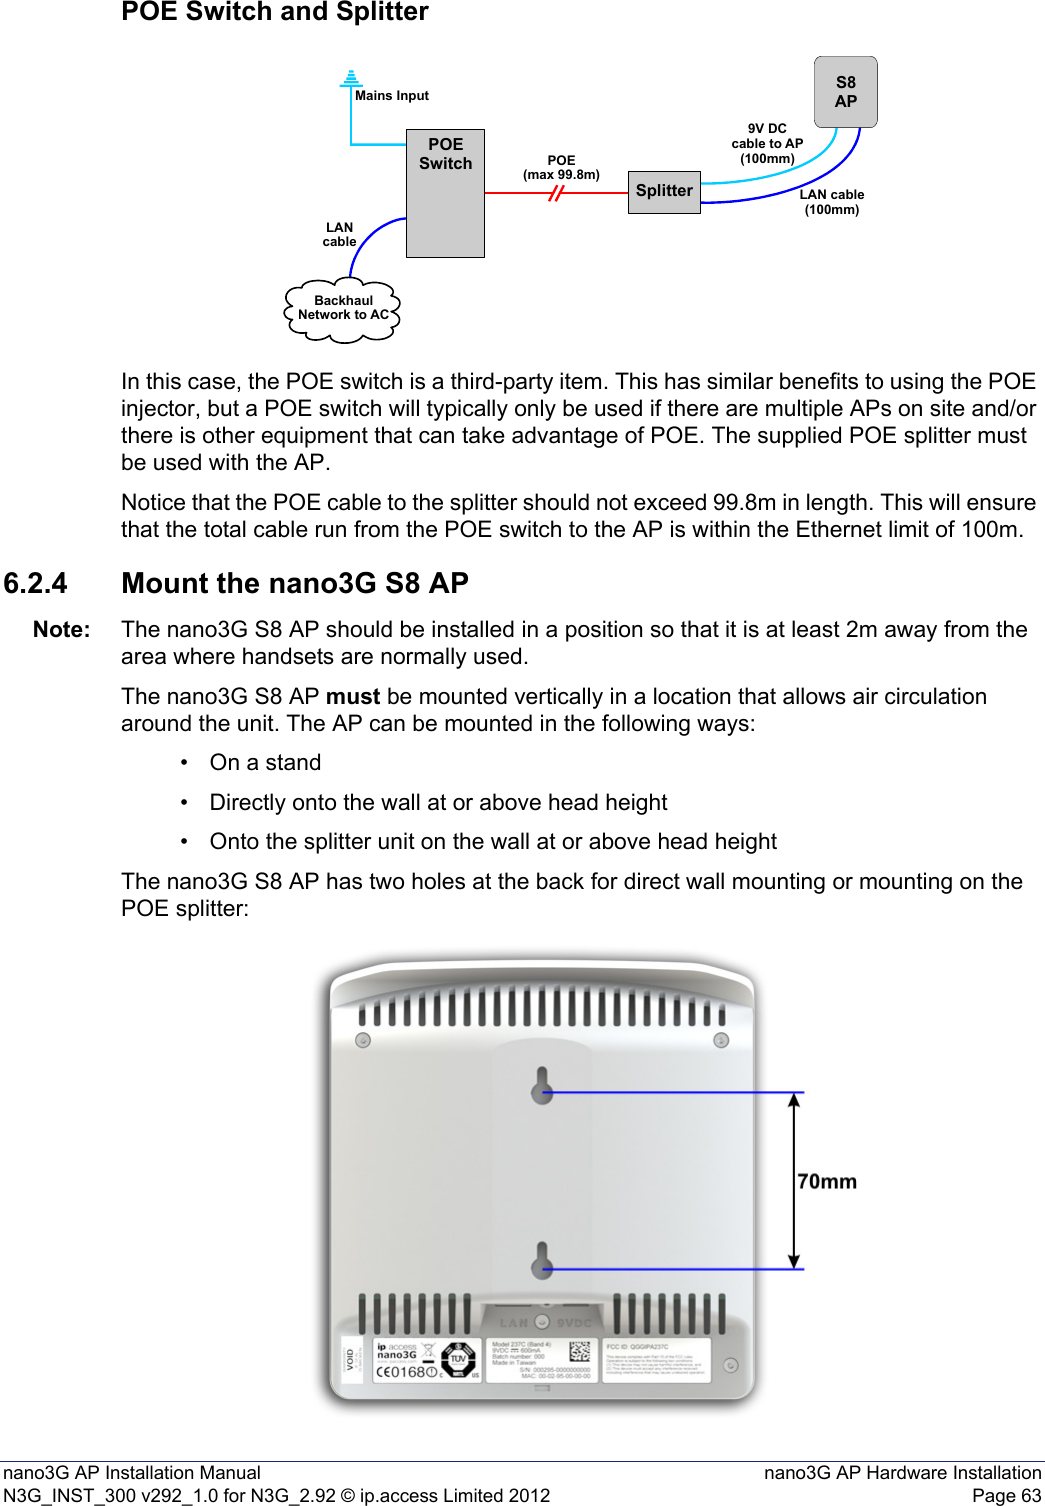 nano3G AP Installation Manual nano3G AP Hardware InstallationN3G_INST_300 v292_1.0 for N3G_2.92 © ip.access Limited 2012 Page 63POE Switch and SplitterIn this case, the POE switch is a third-party item. This has similar benefits to using the POE injector, but a POE switch will typically only be used if there are multiple APs on site and/or there is other equipment that can take advantage of POE. The supplied POE splitter must be used with the AP.Notice that the POE cable to the splitter should not exceed 99.8m in length. This will ensure that the total cable run from the POE switch to the AP is within the Ethernet limit of 100m.6.2.4 Mount the nano3G S8 APNote: The nano3G S8 AP should be installed in a position so that it is at least 2m away from the area where handsets are normally used.The nano3G S8 AP must be mounted vertically in a location that allows air circulation around the unit. The AP can be mounted in the following ways:• On a stand• Directly onto the wall at or above head height• Onto the splitter unit on the wall at or above head heightThe nano3G S8 AP has two holes at the back for direct wall mounting or mounting on the POE splitter:SplitterPOESwitchS8APPOE(max 99.8m)Mains InputLANcableBackhaulNetwork to AC9V DCcable to AP(100mm)LAN cable(100mm)